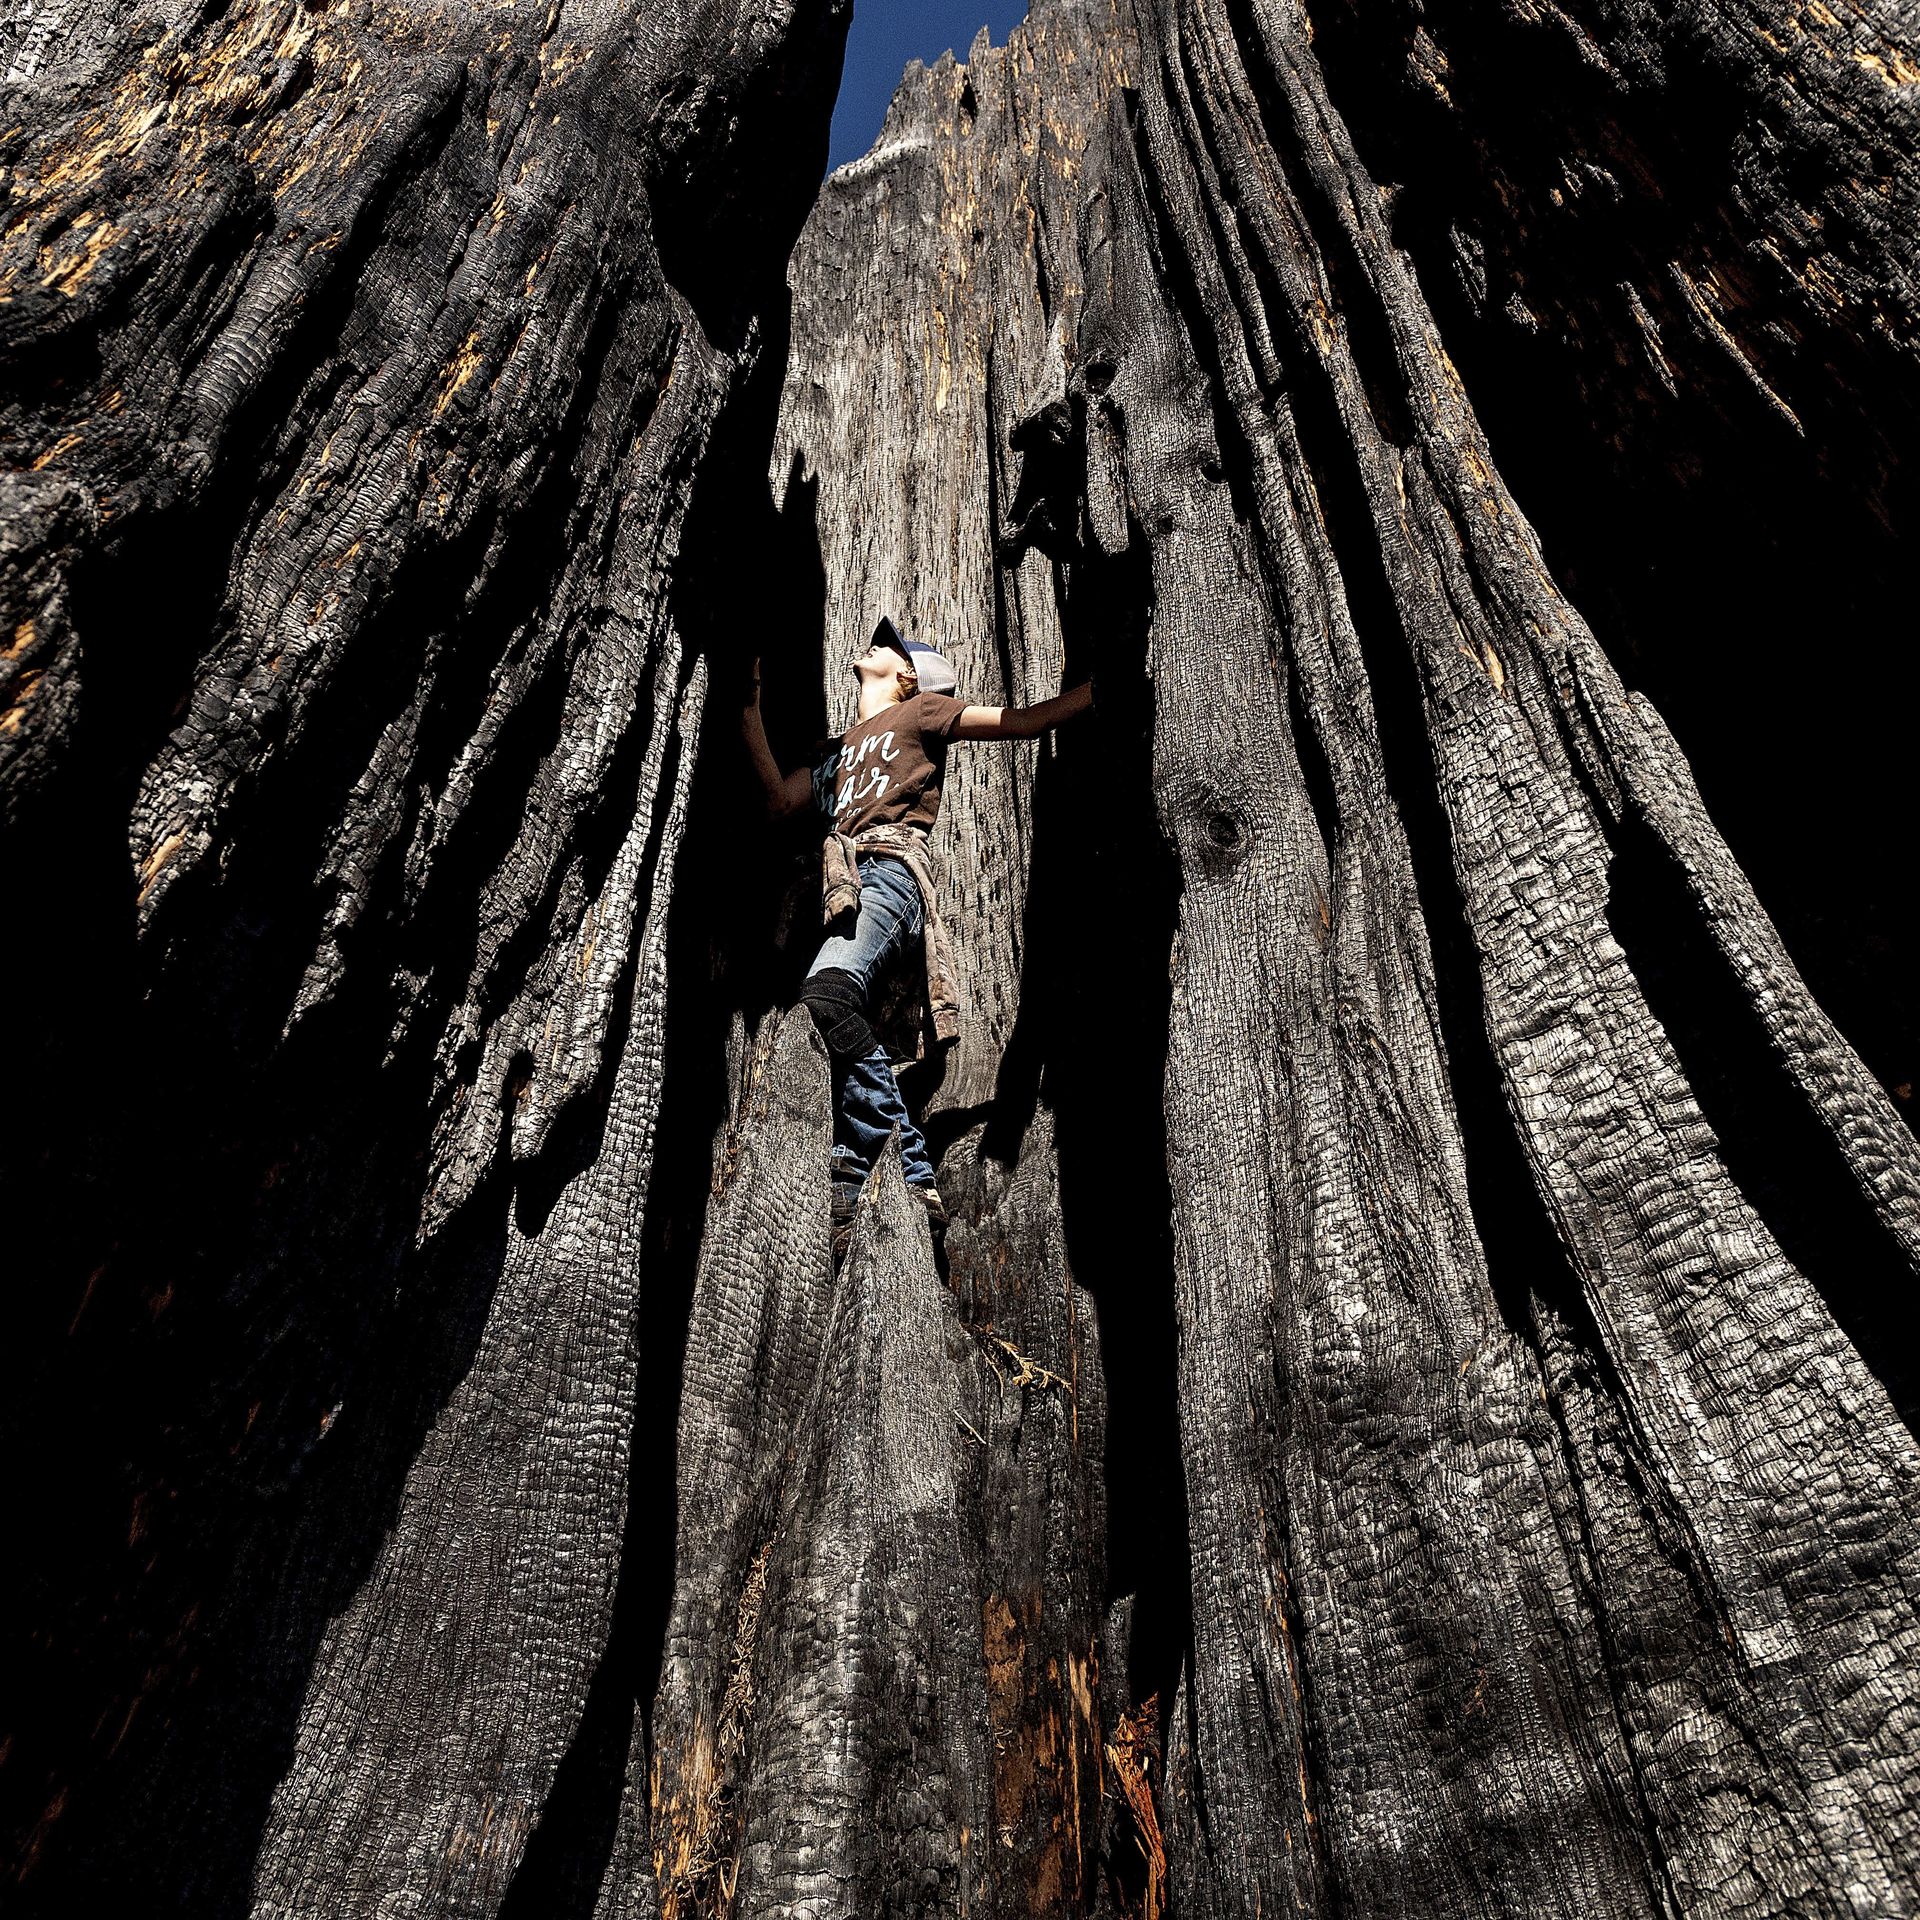 Ashtyn Perry, 13, climbs a scorched sequoia tree in Sequoia Crest, Calif. Photo: Noah Berger